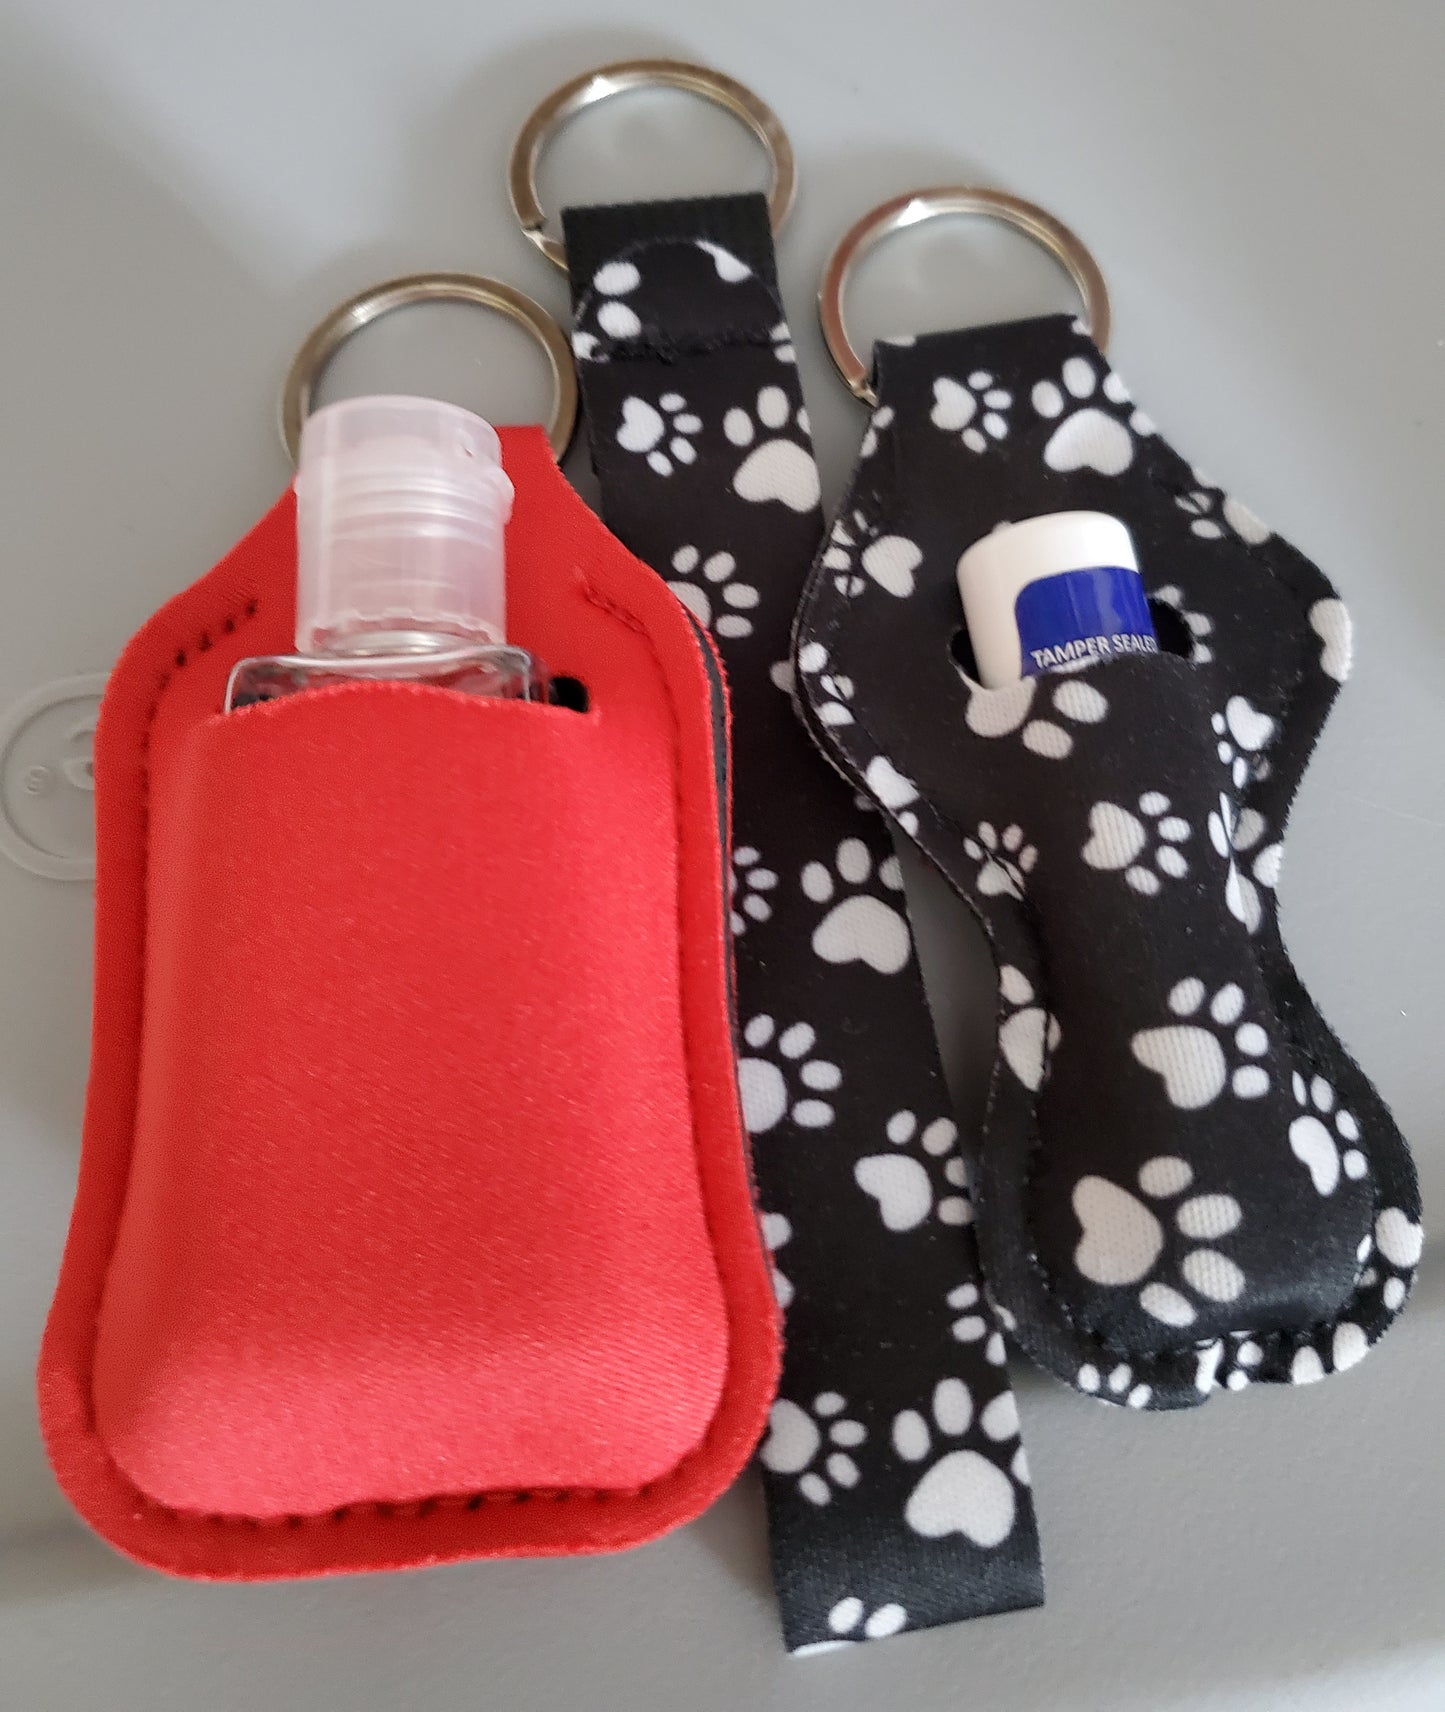 Black Paw Print Set with Red Safety Keychain-Personal Safety Kit 13 pc.